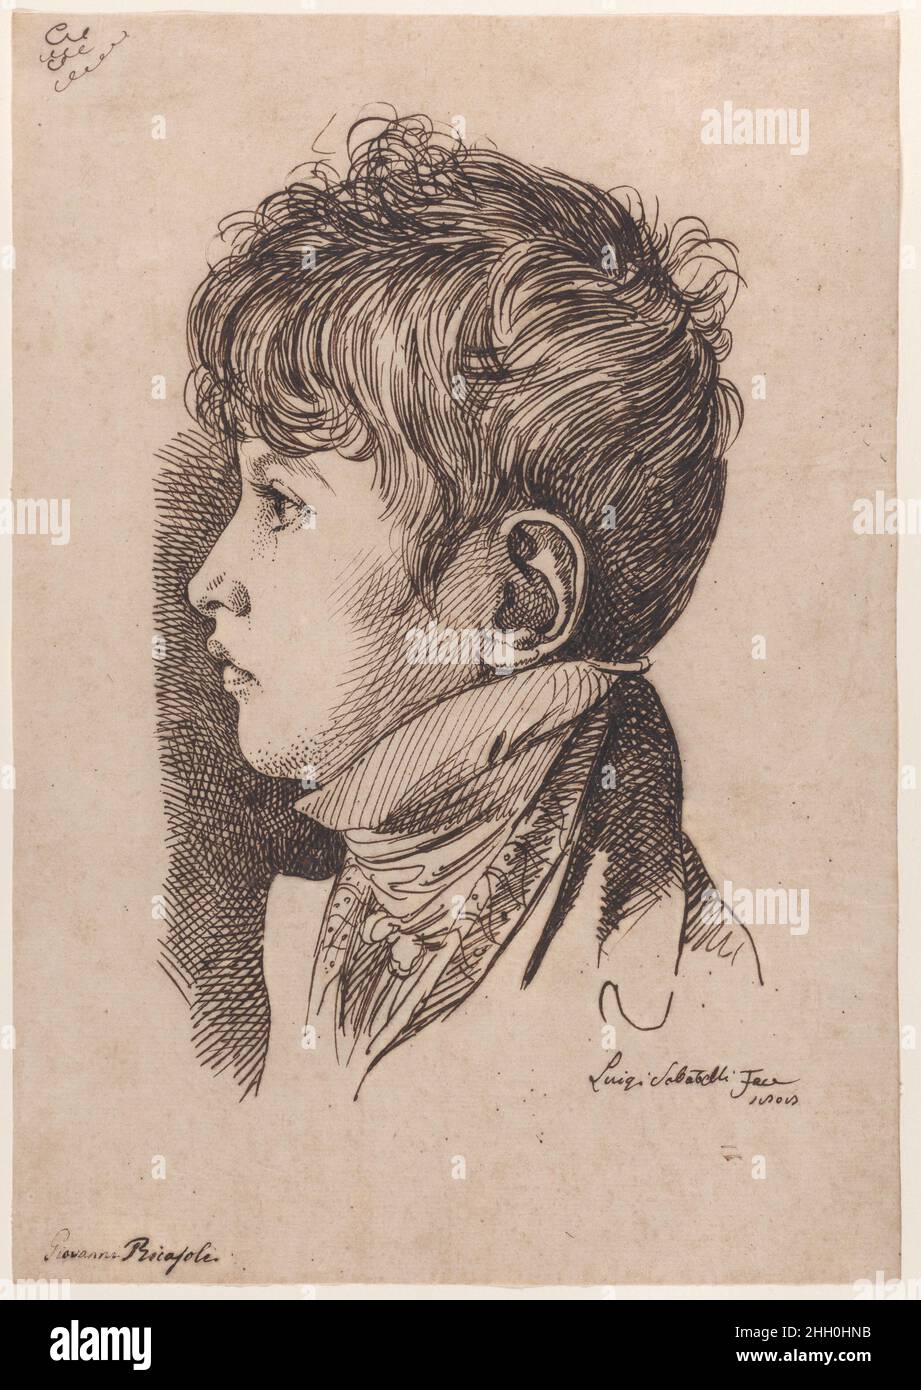 Portrait of Giovanni Ricasoli, aged 5 1808 Luigi Sabatelli Italian. Portrait of Giovanni Ricasoli, aged 5. Luigi Sabatelli (Italian, Florence 1772–1850 Milan). 1808. Pen and dark brown ink. Drawings Stock Photo